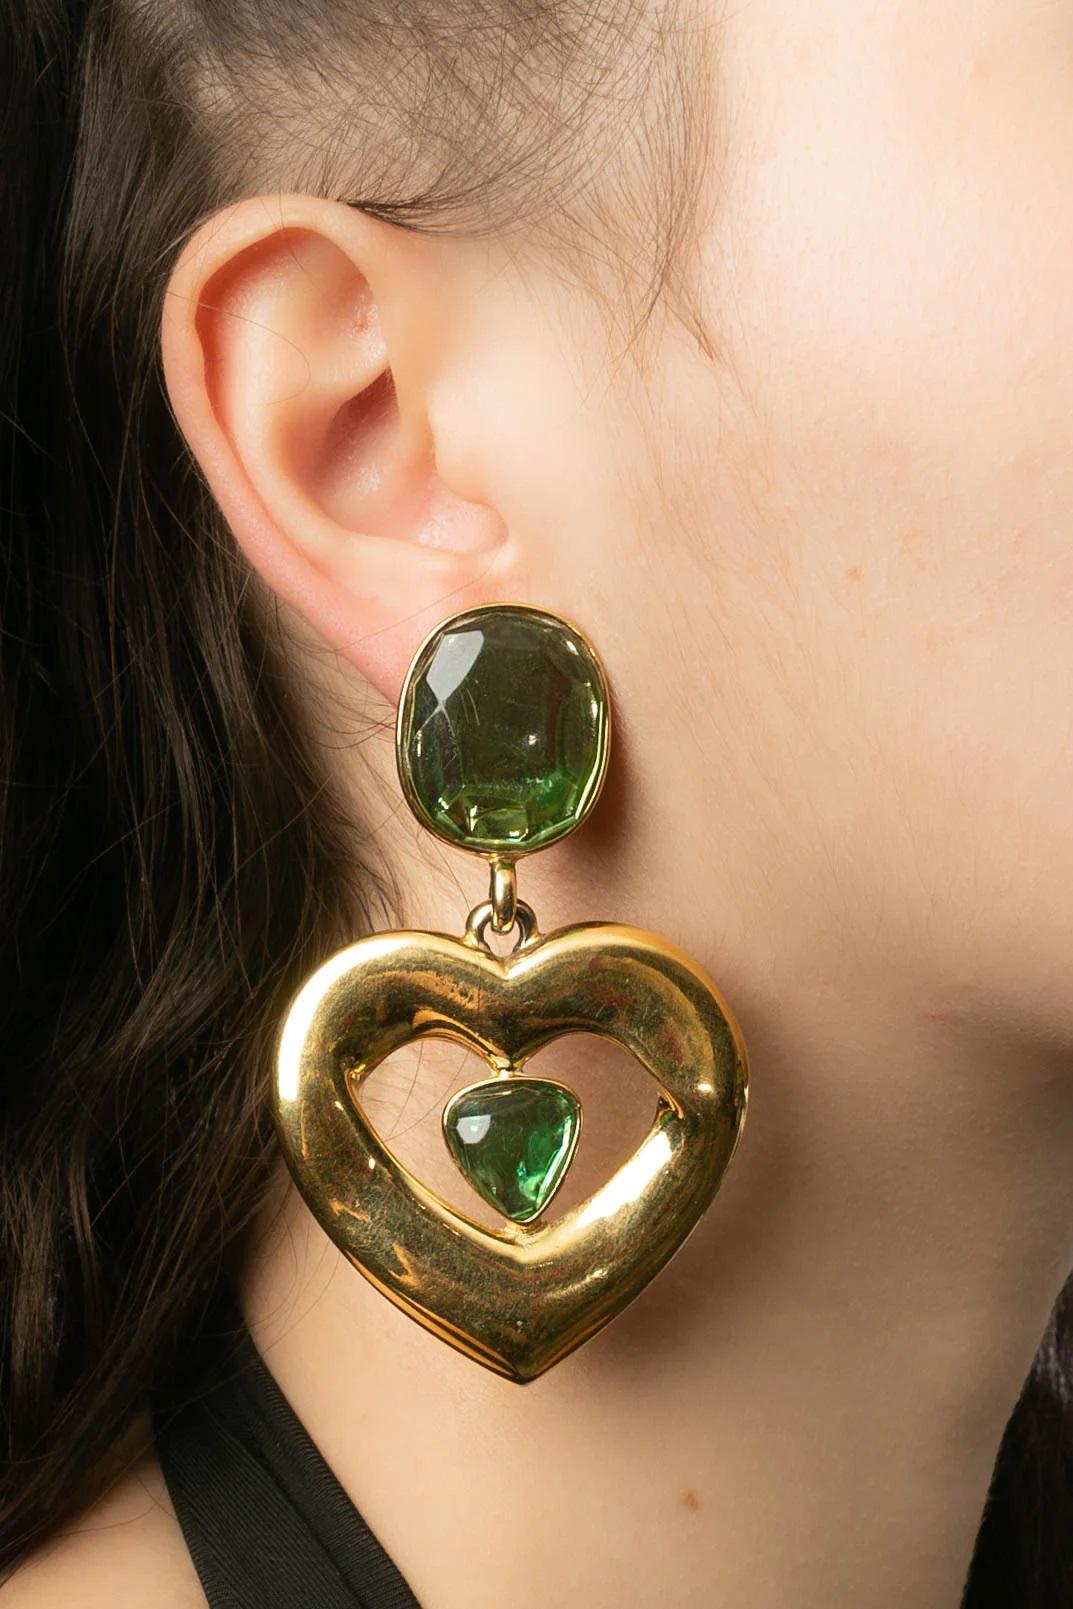 Yves Saint Laurent (Made in France) Clip-on gilded metal earrings holding a heart and decorated with green resin cabochons.

Additional information:
Dimensions: 5 W x 7.7 H cm (1.96